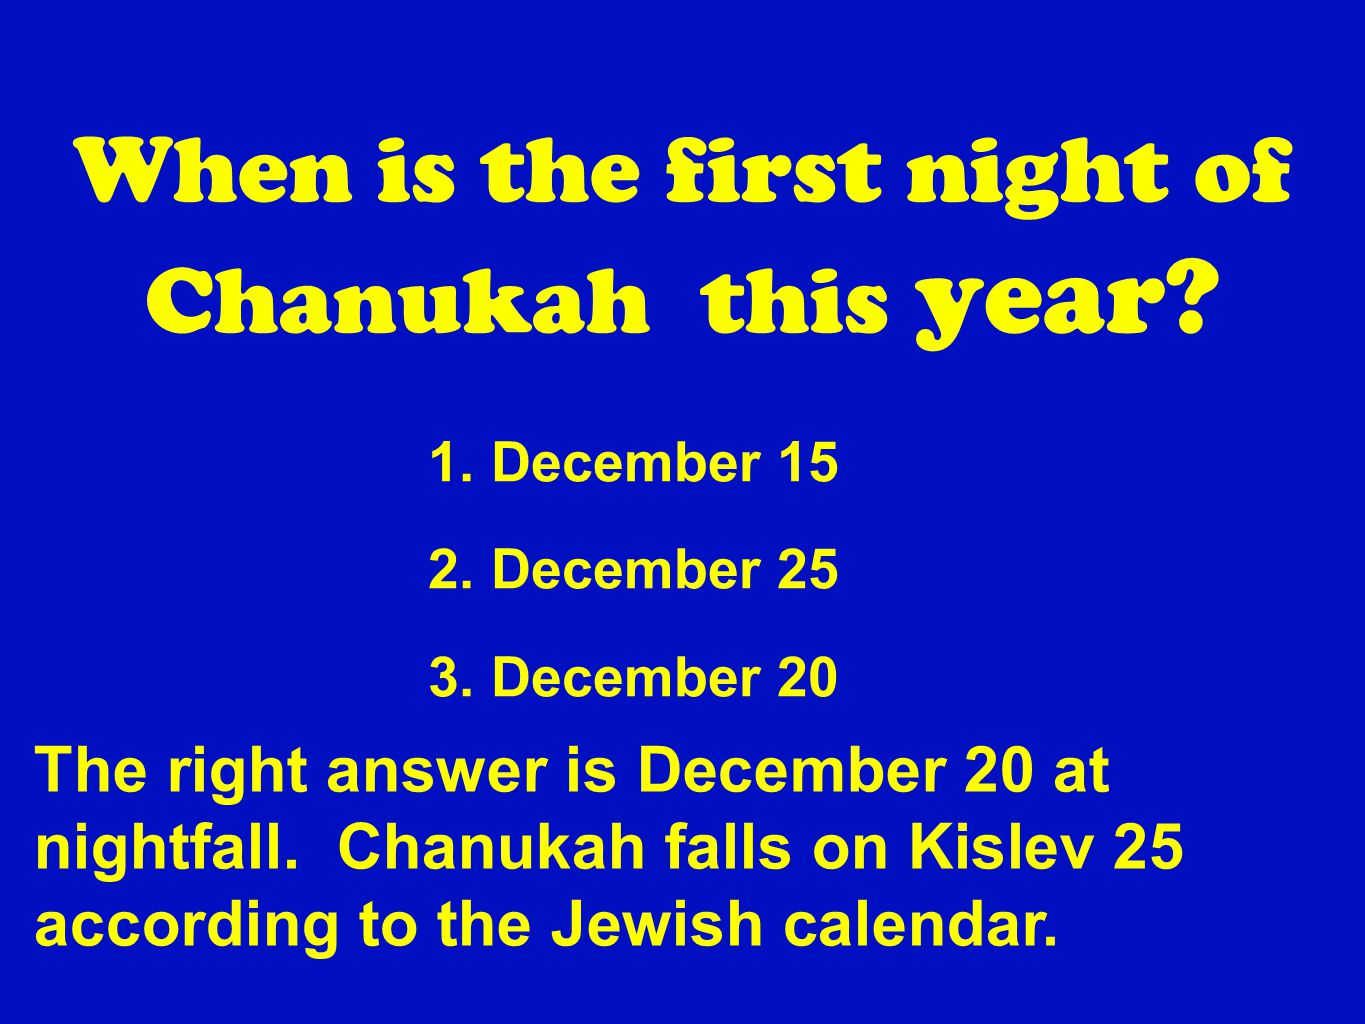 When is the first night of Chanukah this year